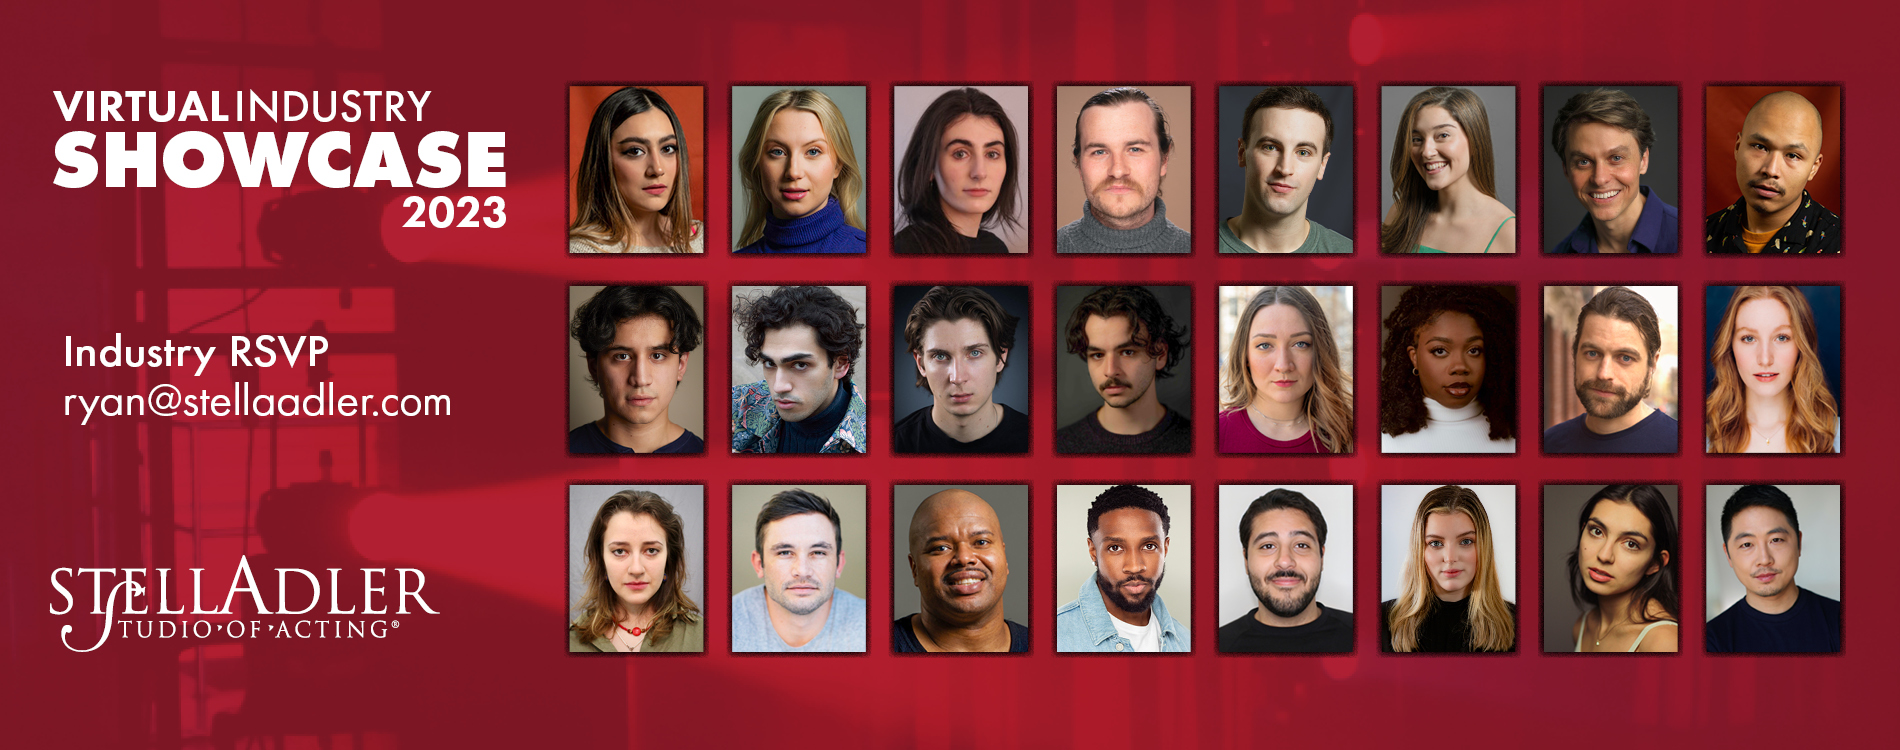 Banner graphic reading, "Stella Adler Studio of Acting Virtual Showcase 2023 - Industry RSVP: ryan@stellaadler.com" with headshots of the 24 featured actors.